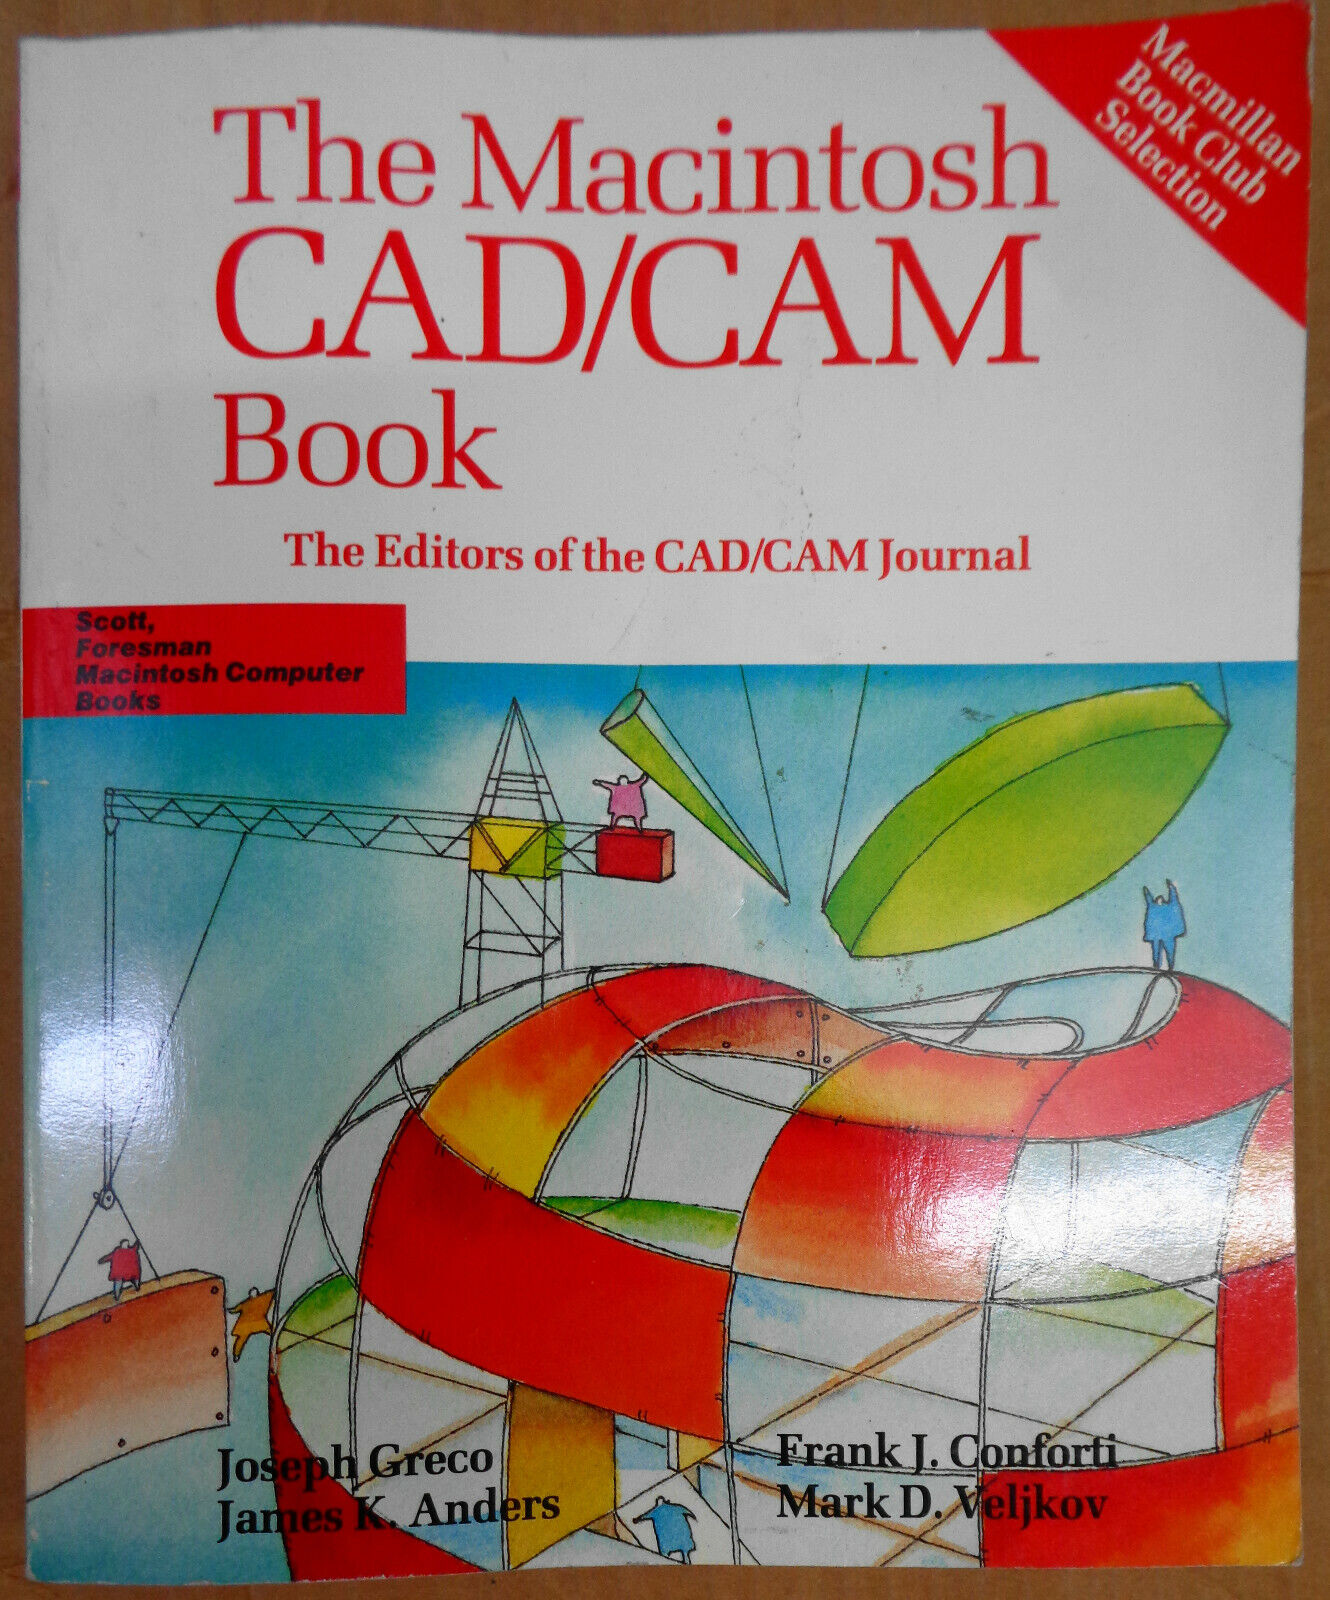 The MacIntosh CAD/CAM Book, by Editors of the CAD/CAM Journal, Joseph Greco, et 